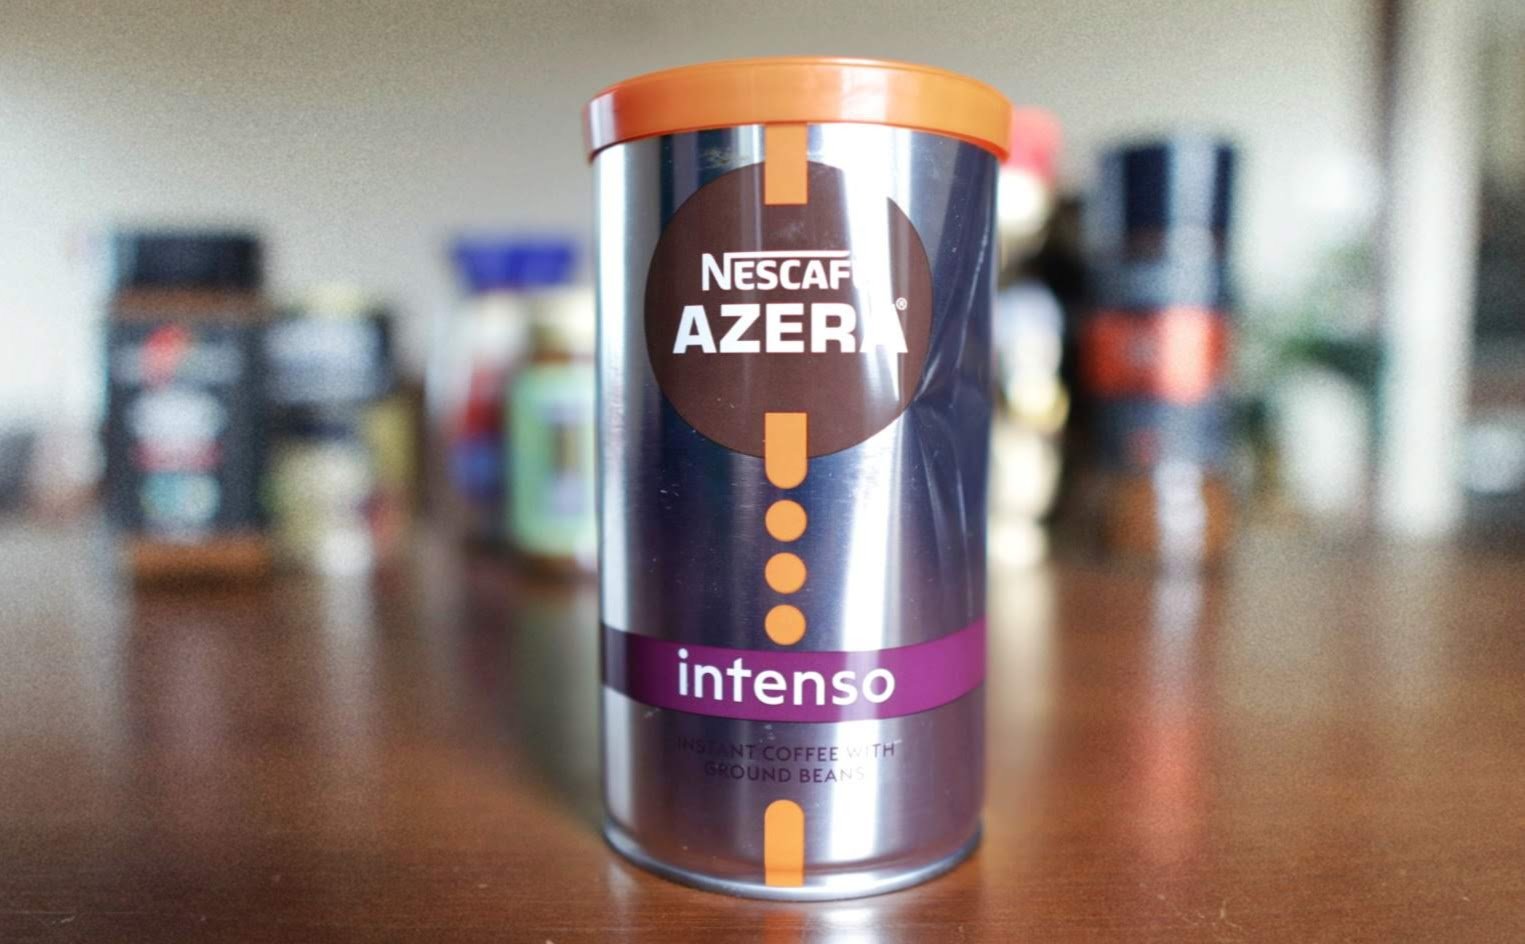 The 10 Best Instant Coffee brands